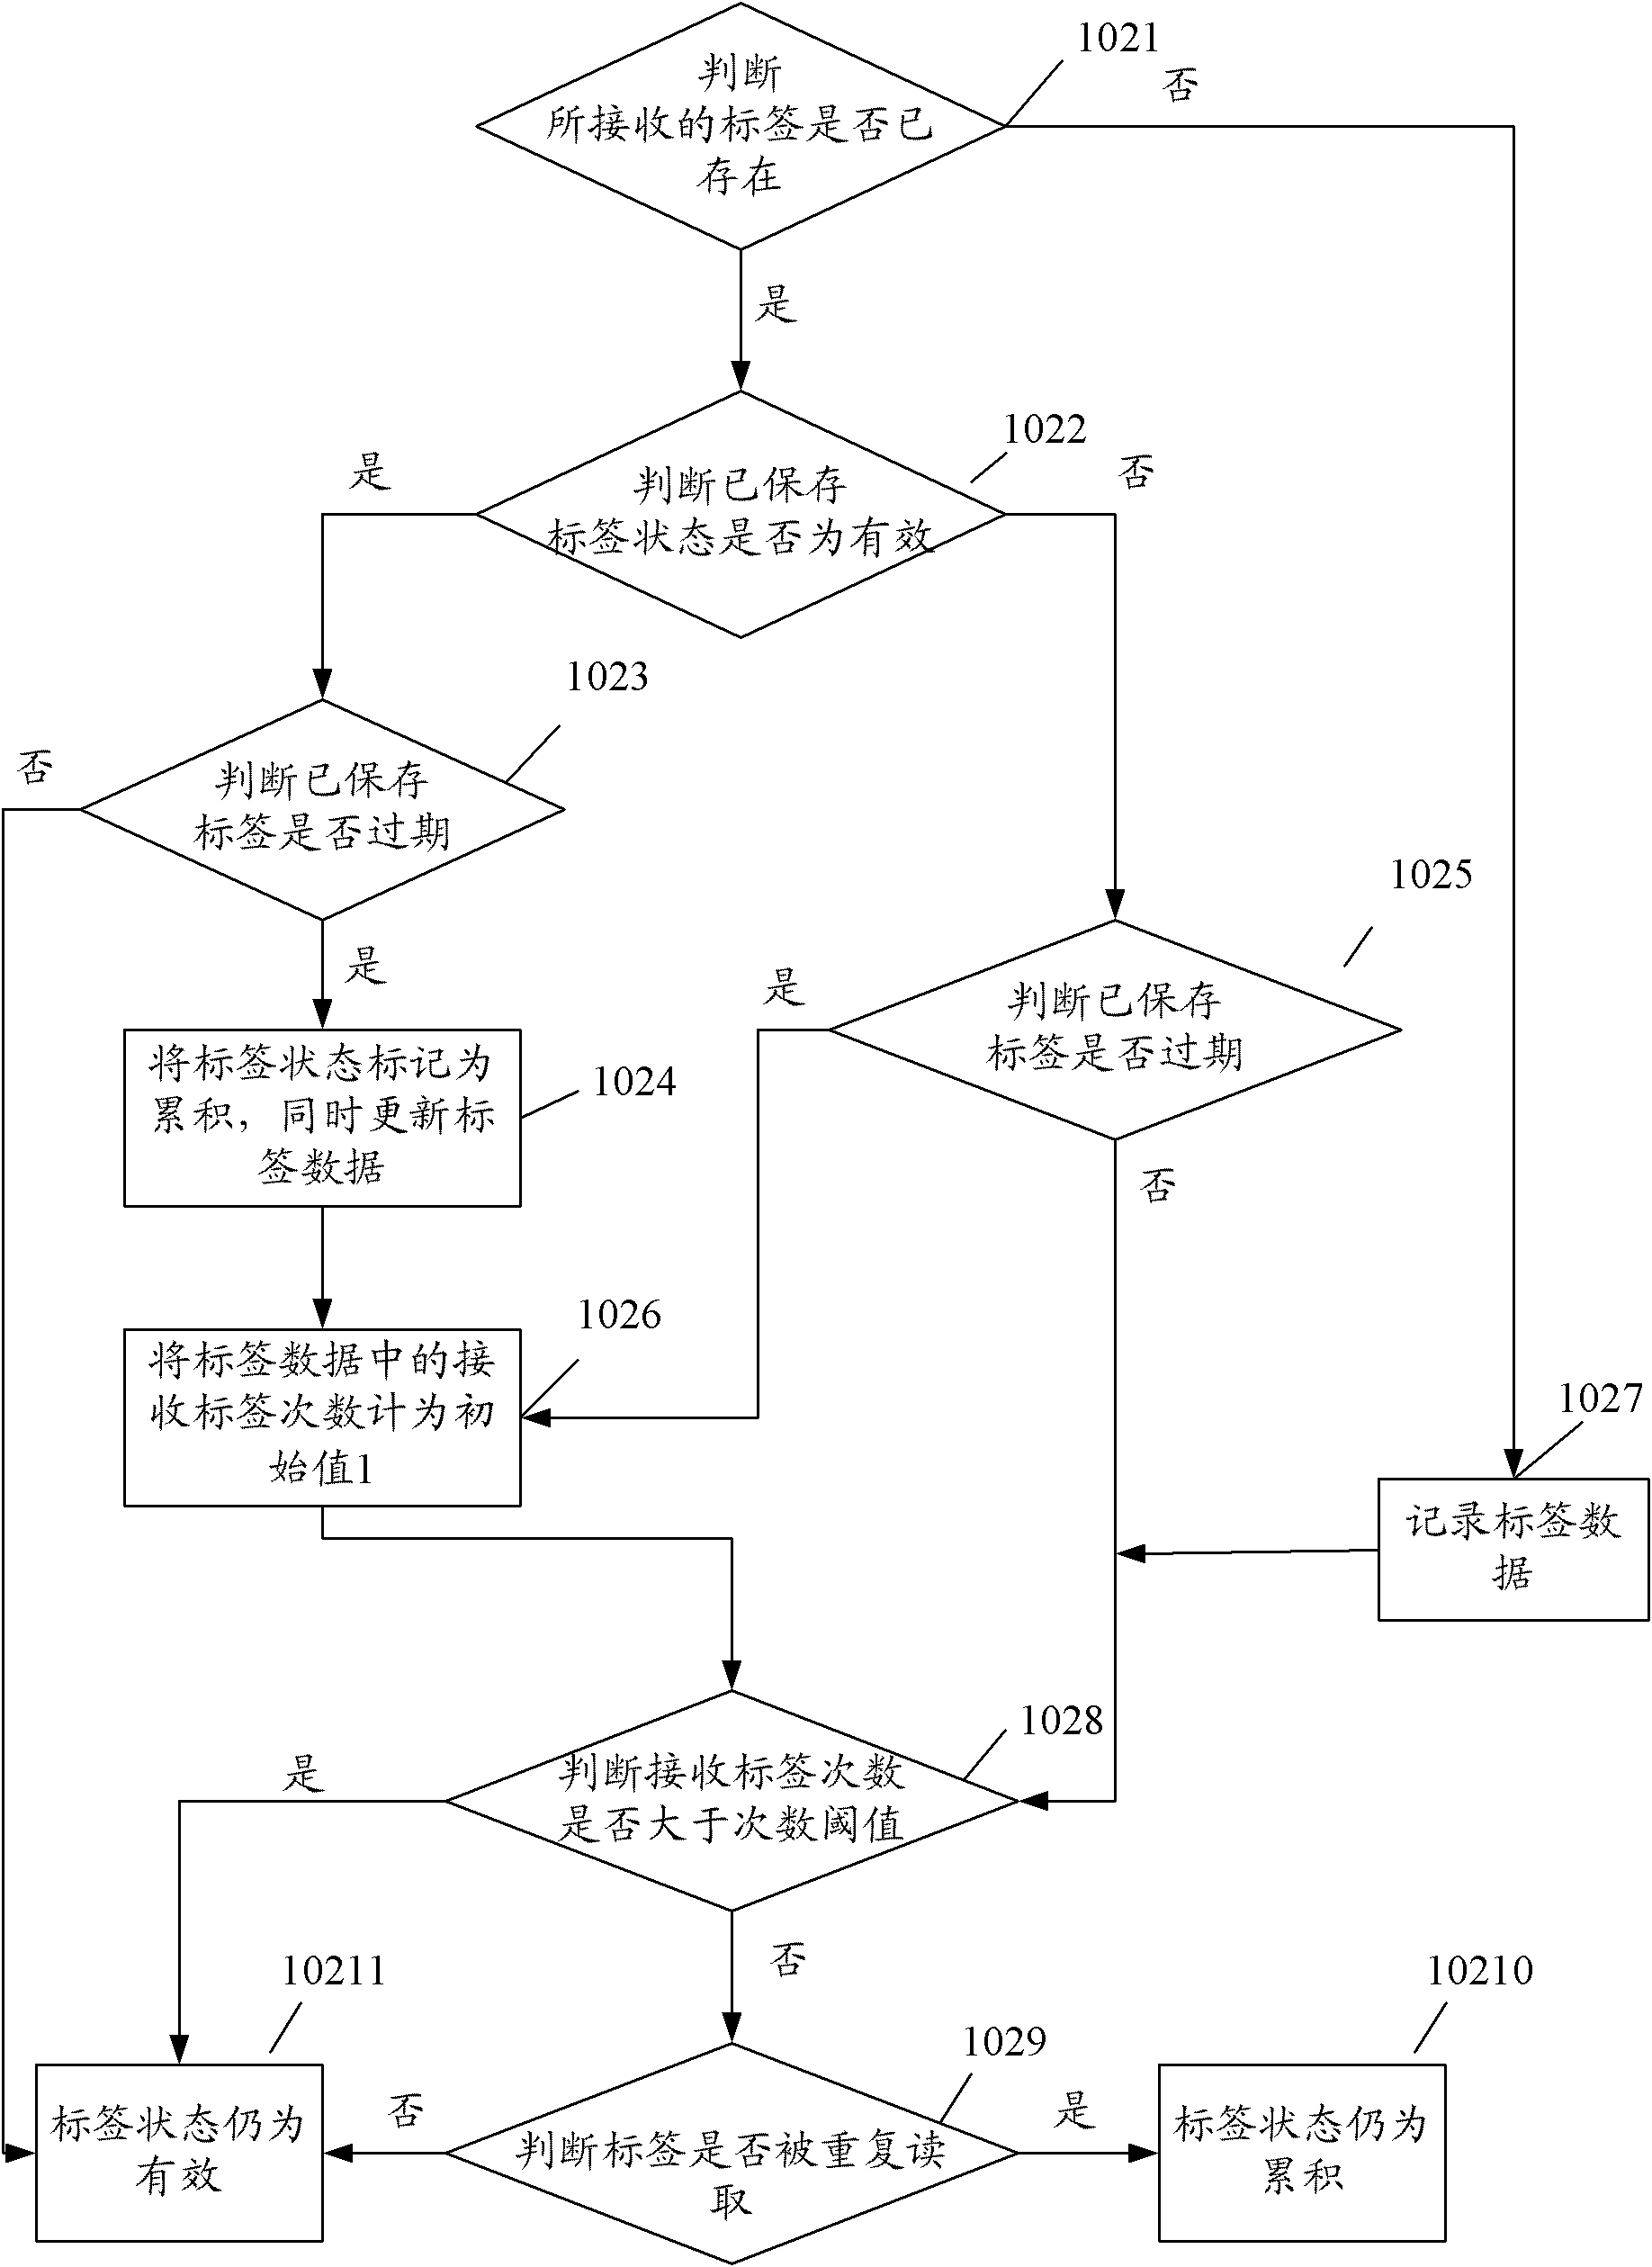 Method and device for processing tag data